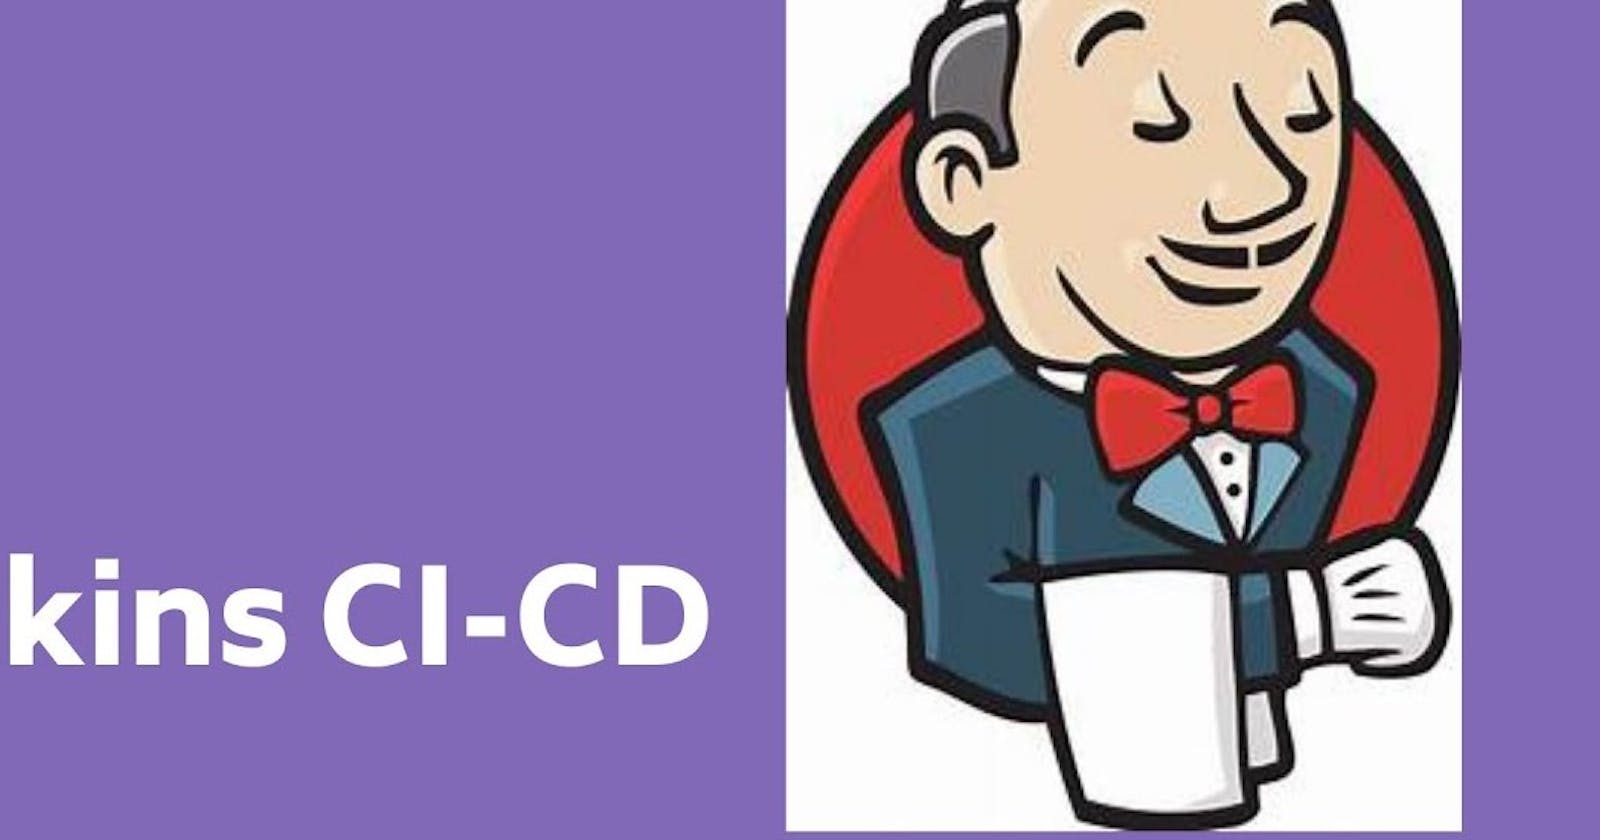 #Day24 : Day 24 Task: Complete Jenkins CI/CD Project